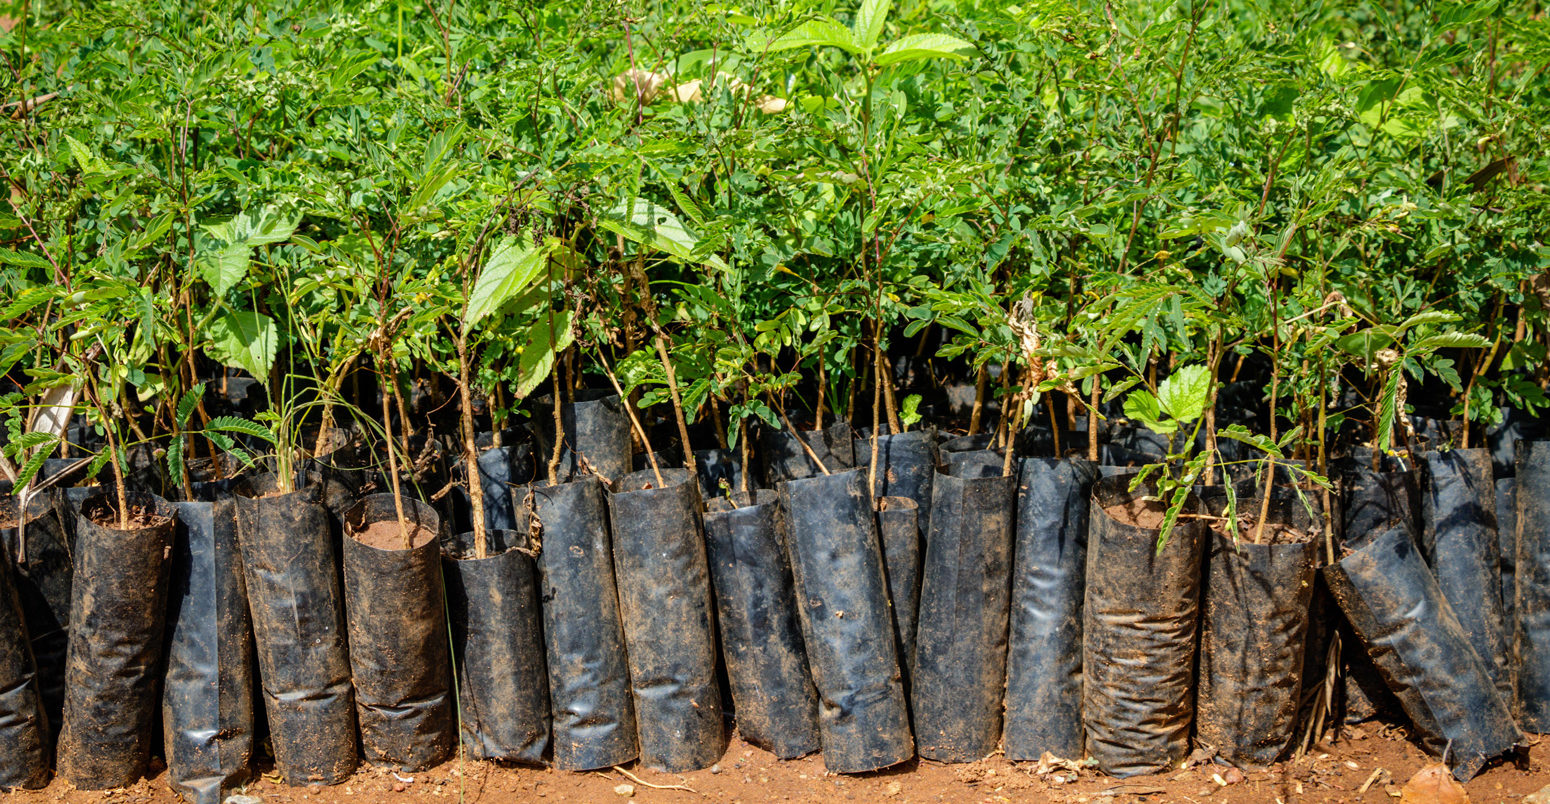 Tree planting in Uganda. Small seedlings growing in African soil with plastic protection.